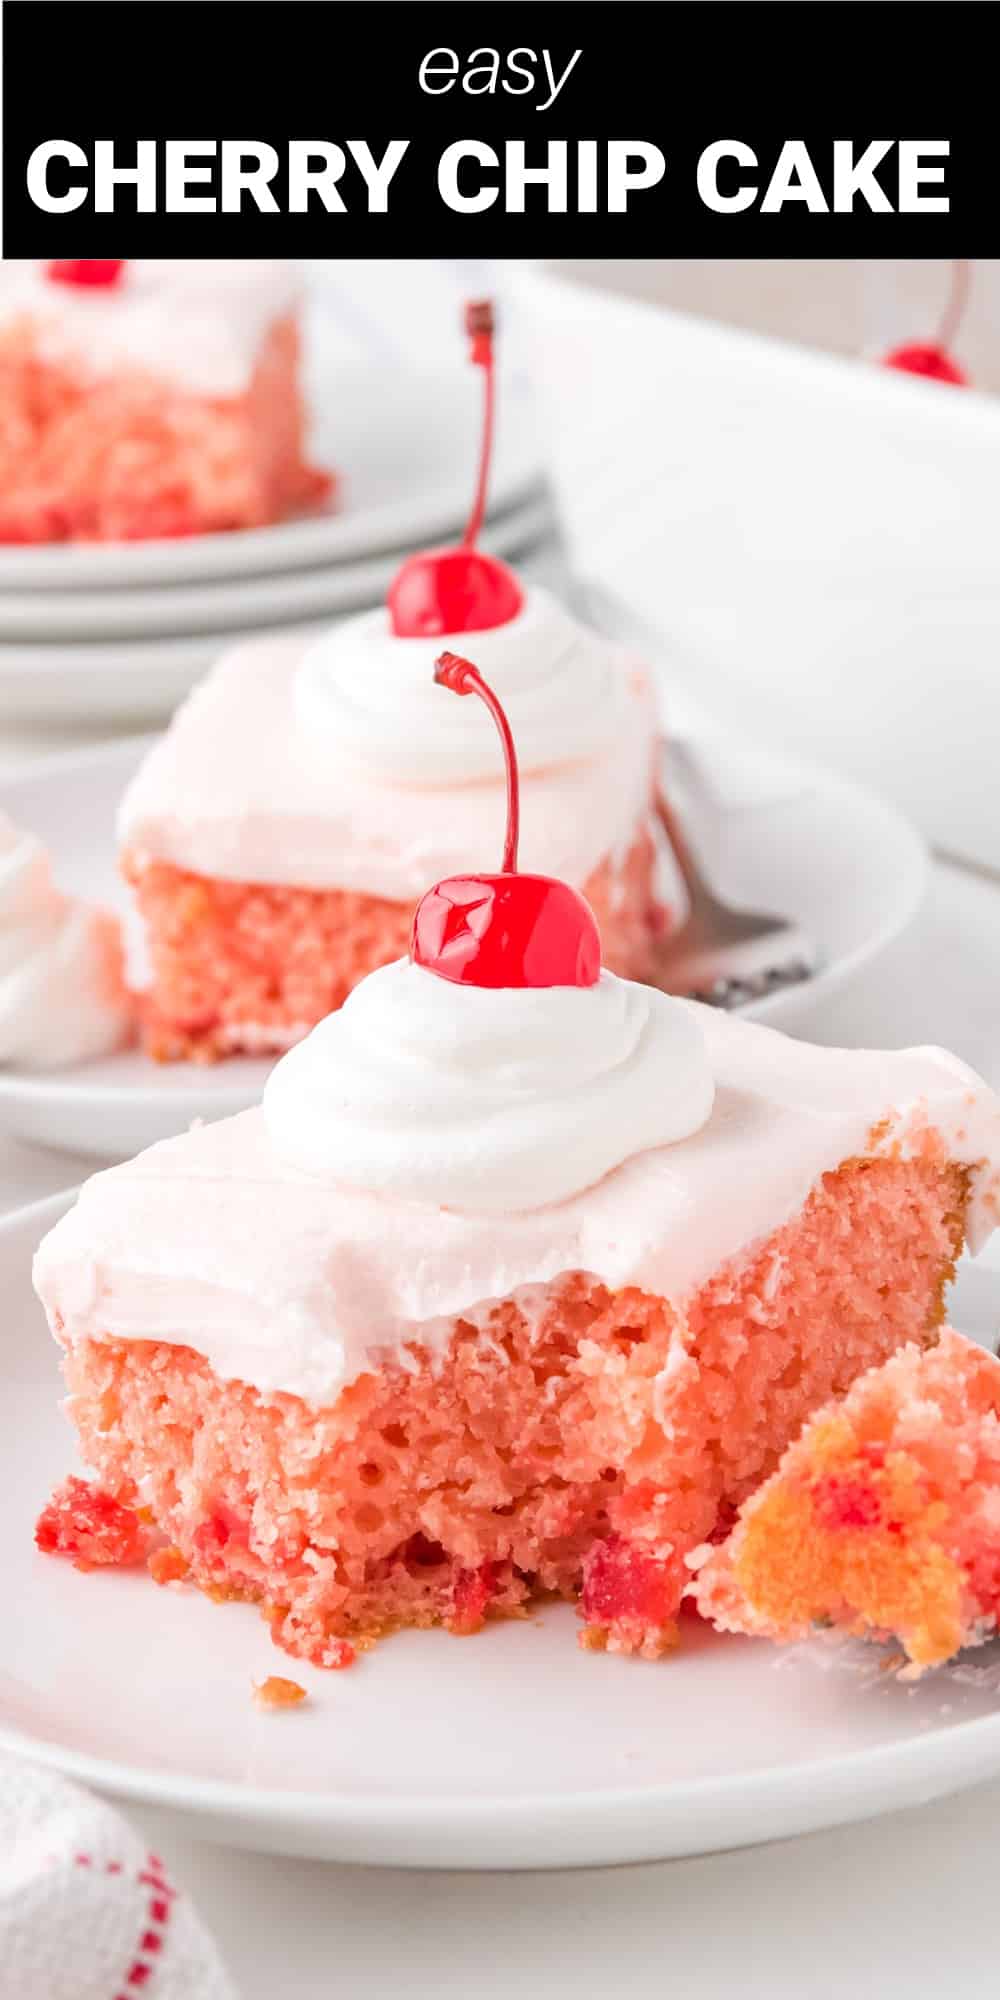 This cherry chip cake recipe is a light and fluffy cake flavored with sweet maraschino cherry juice and filled with chopped cherry pieces. It’s topped with a smooth and creamy buttercream frosting that’s bursting with cherry flavor. The result is a decadent dessert that looks beautiful and tastes even better. 